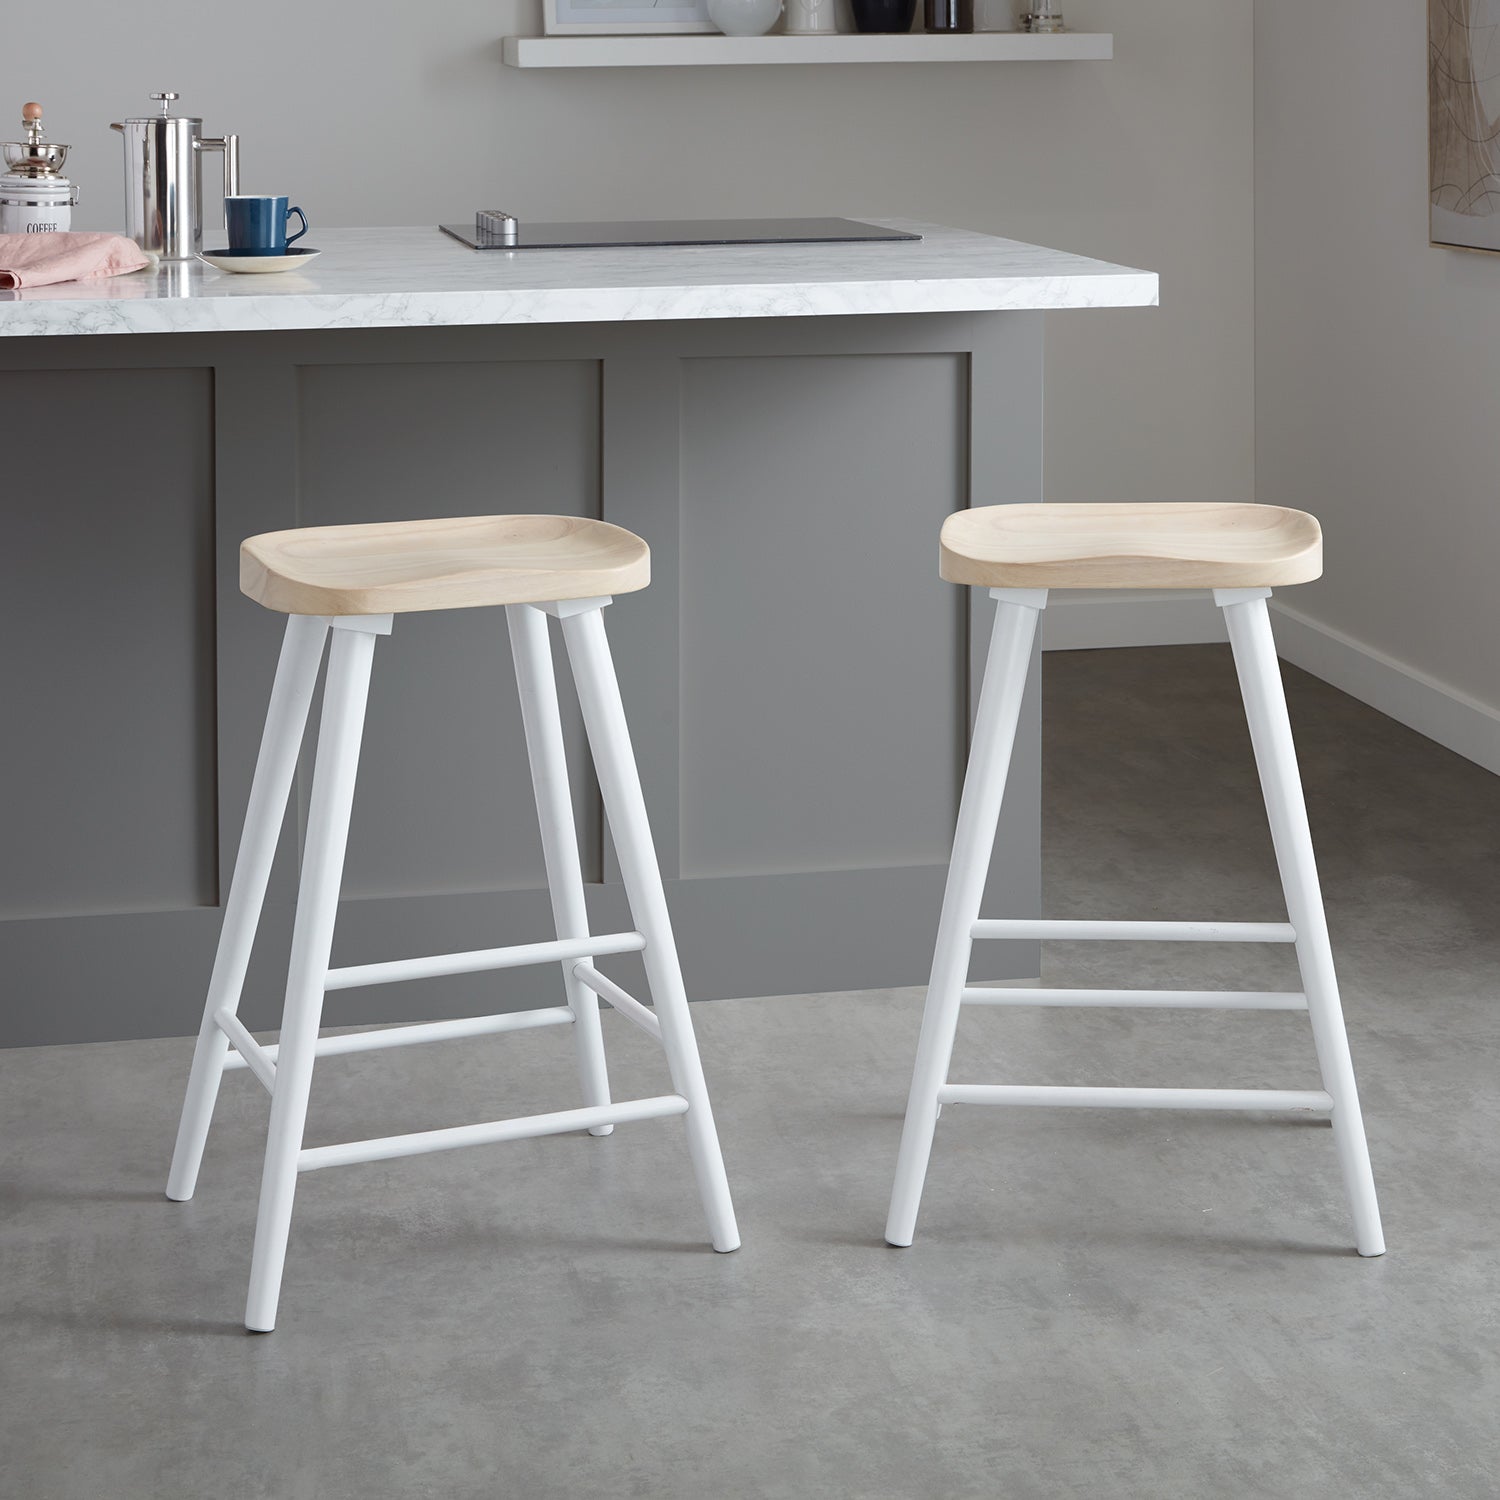 Silvester bar stool - white frame with whitewash top - Laura James